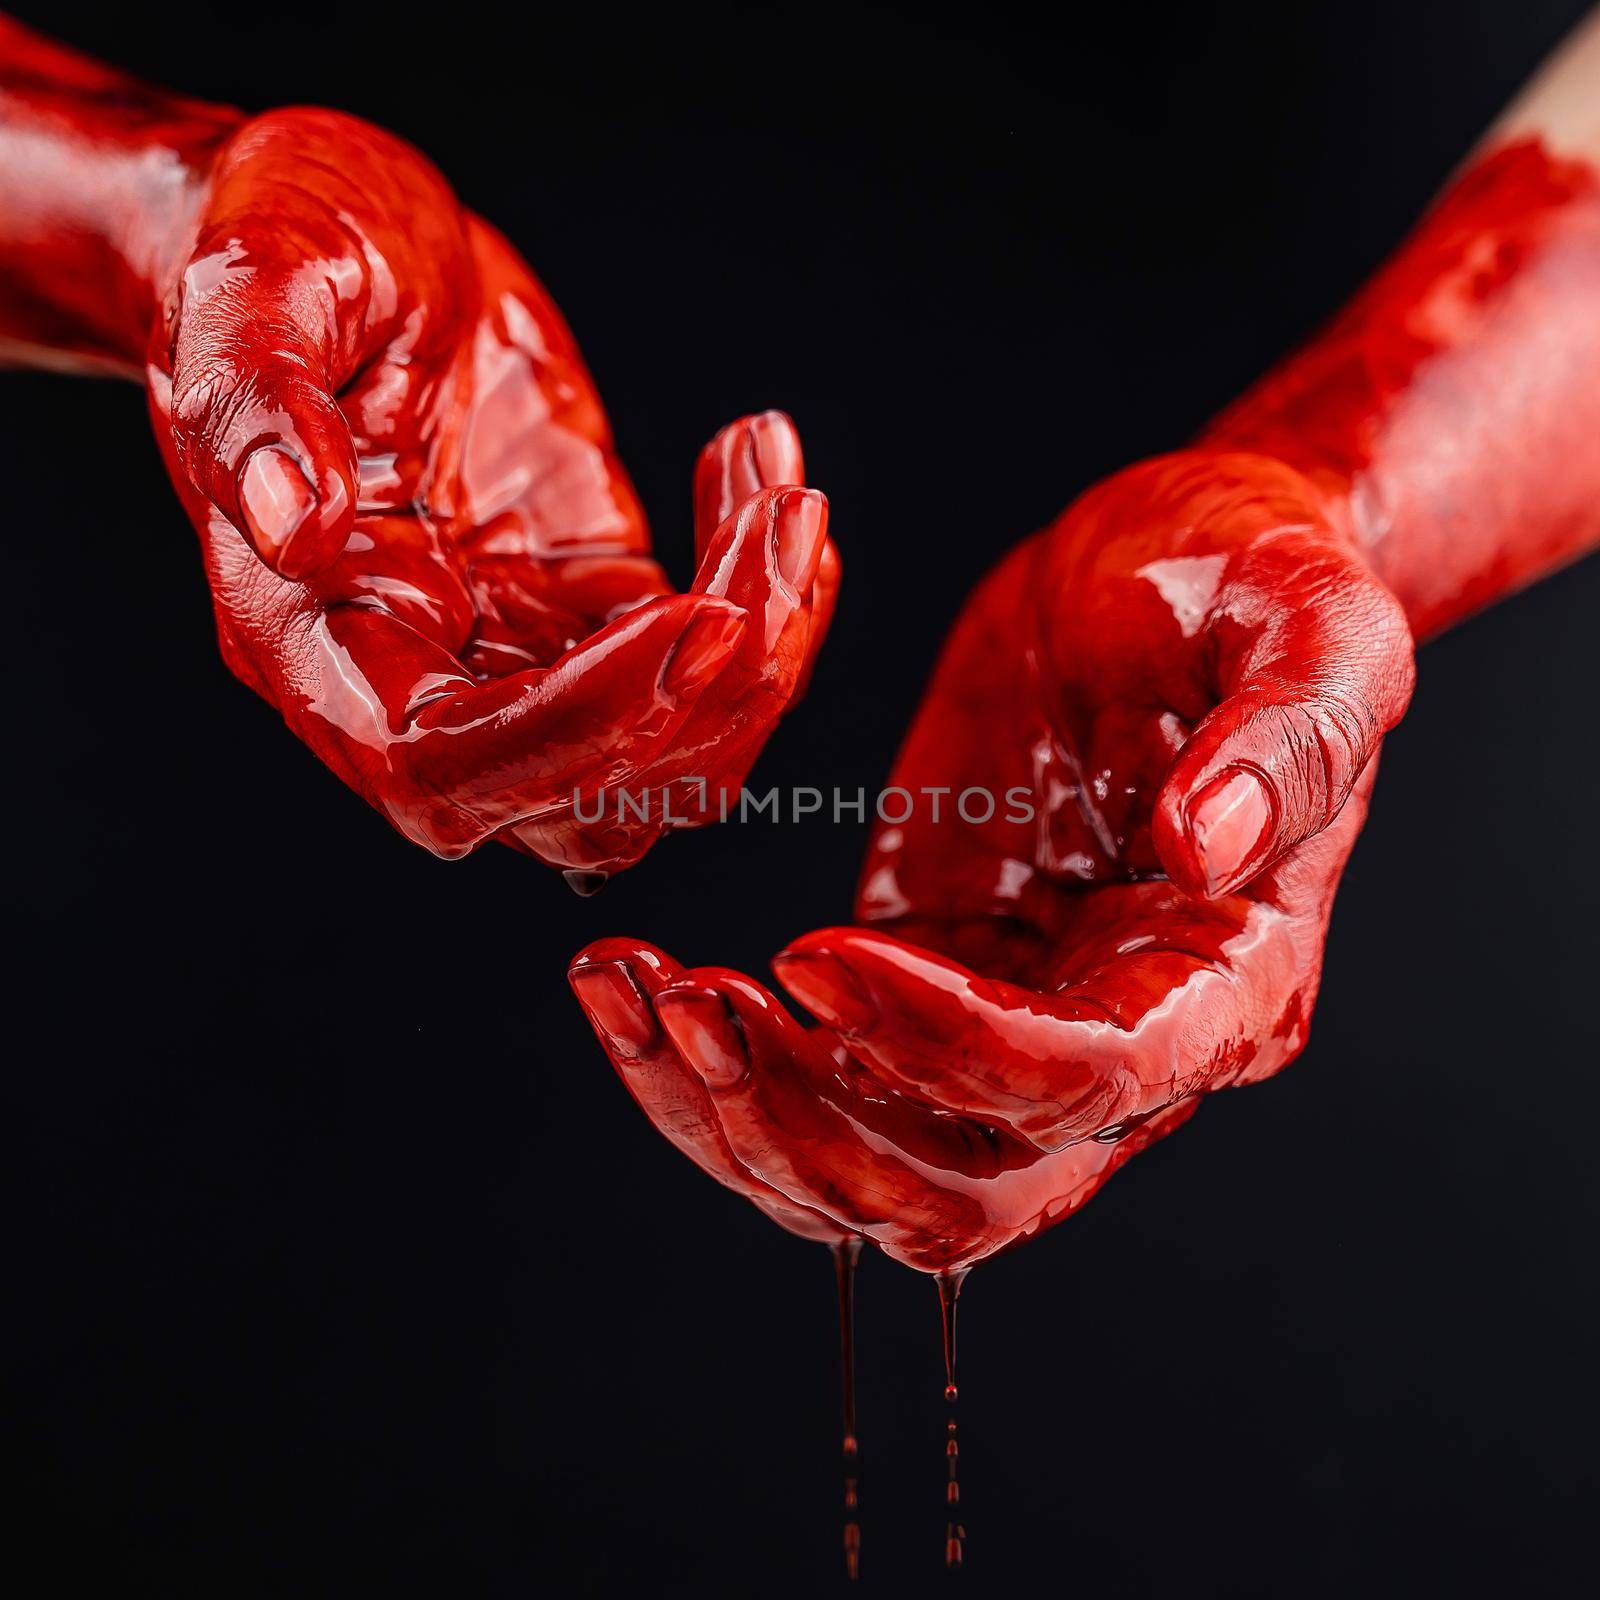 Women's hands in blood on a black background